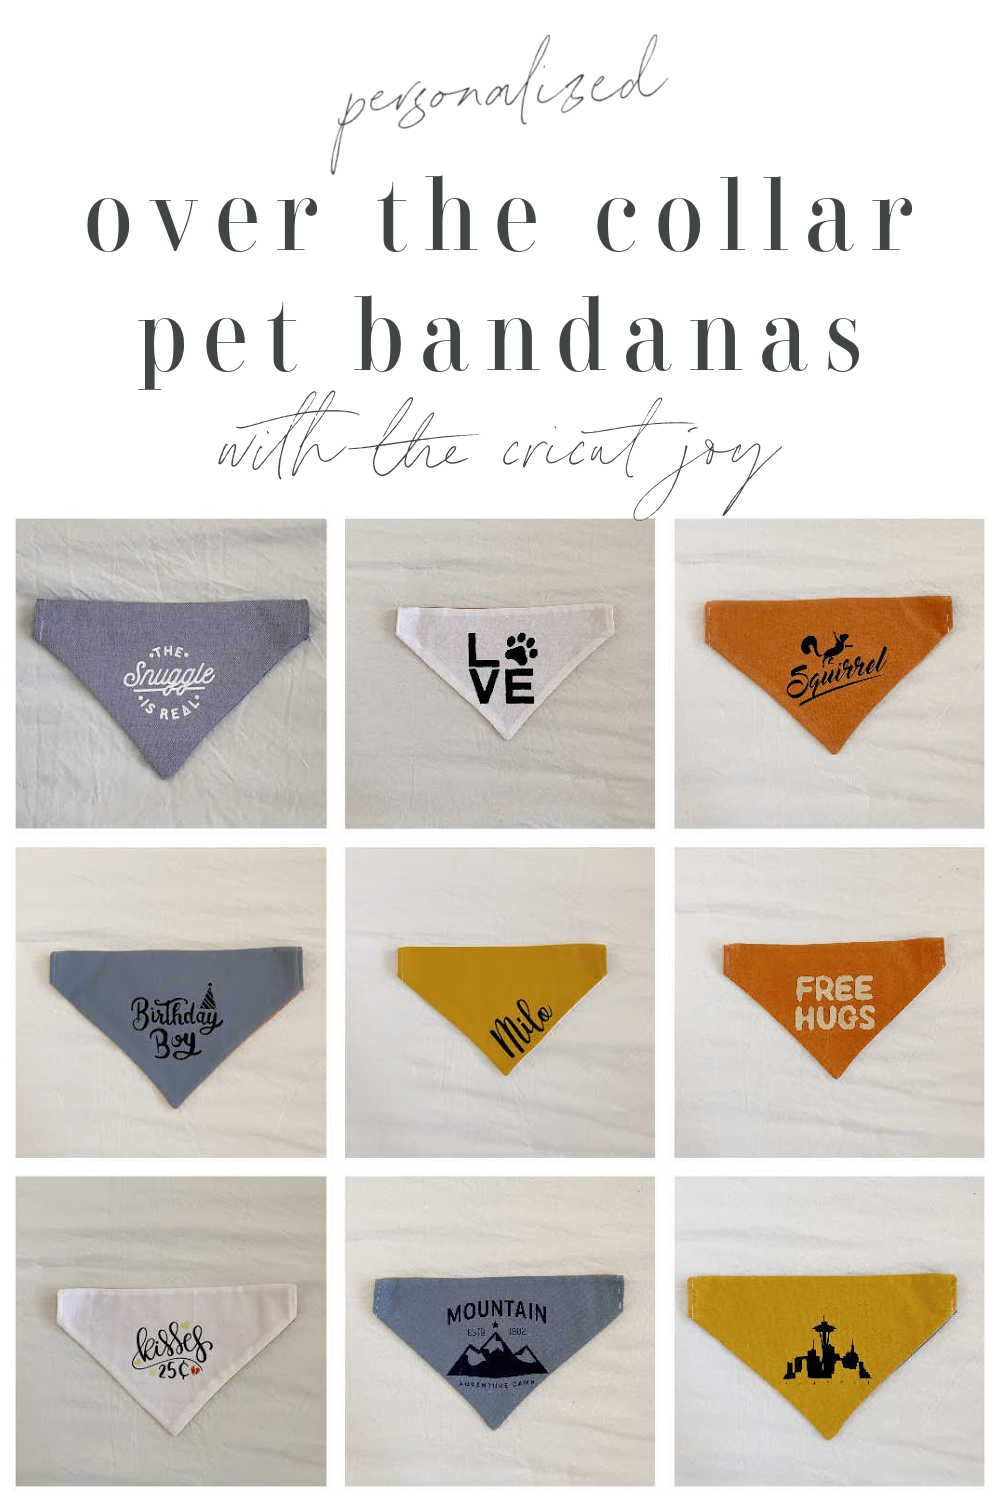 Whimsical Squirrel Bandana for Dogs and Other Pets 